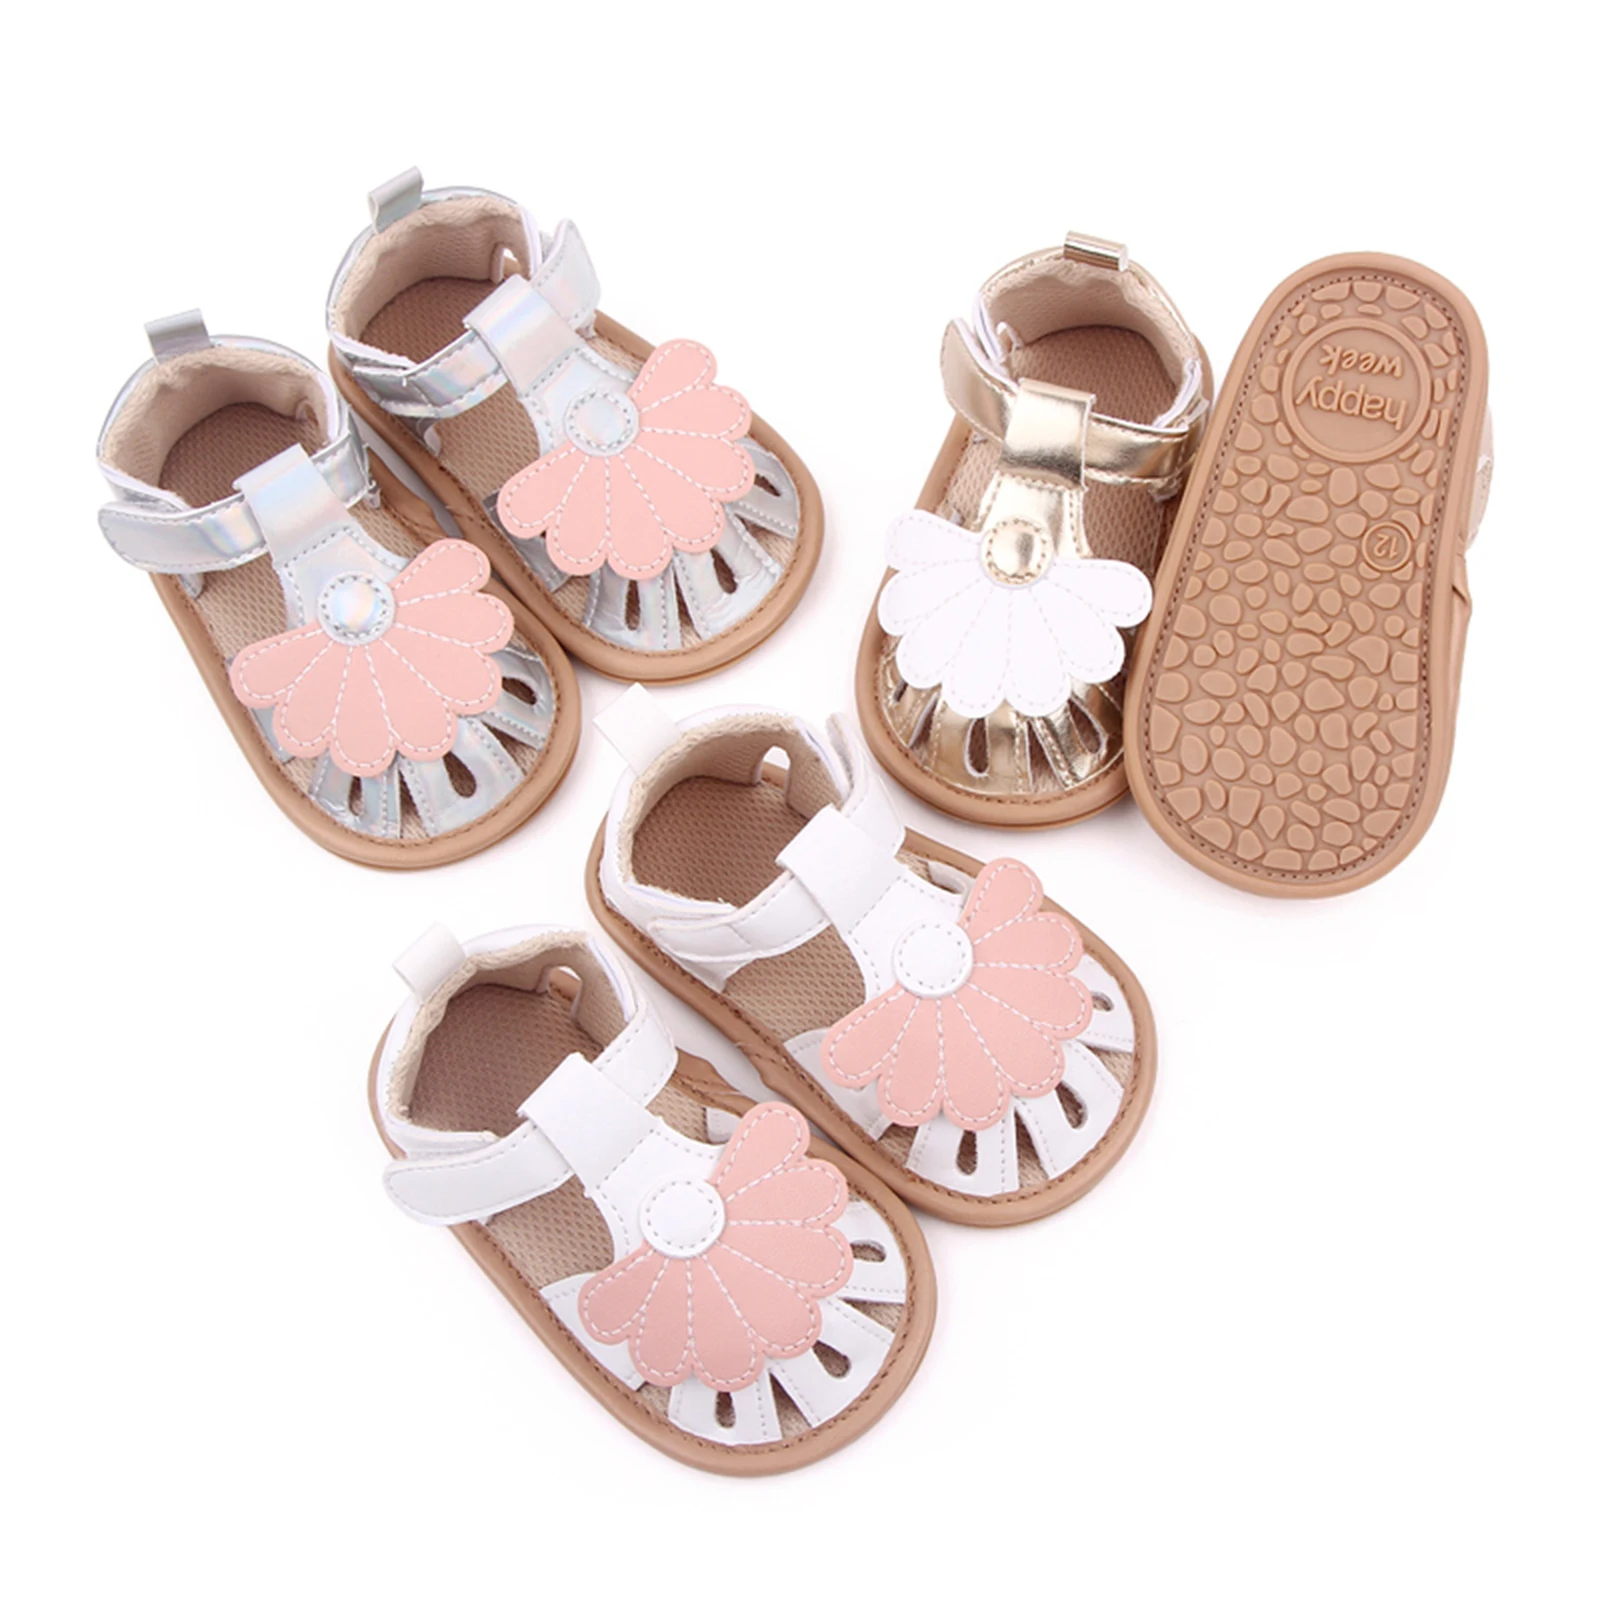 

0-18M Infant Baby Girls Sandal Flexible PU Leather Non-slip Flower Flat Shoes Summer Toddler Newborn Shoes First Walkers Shoes